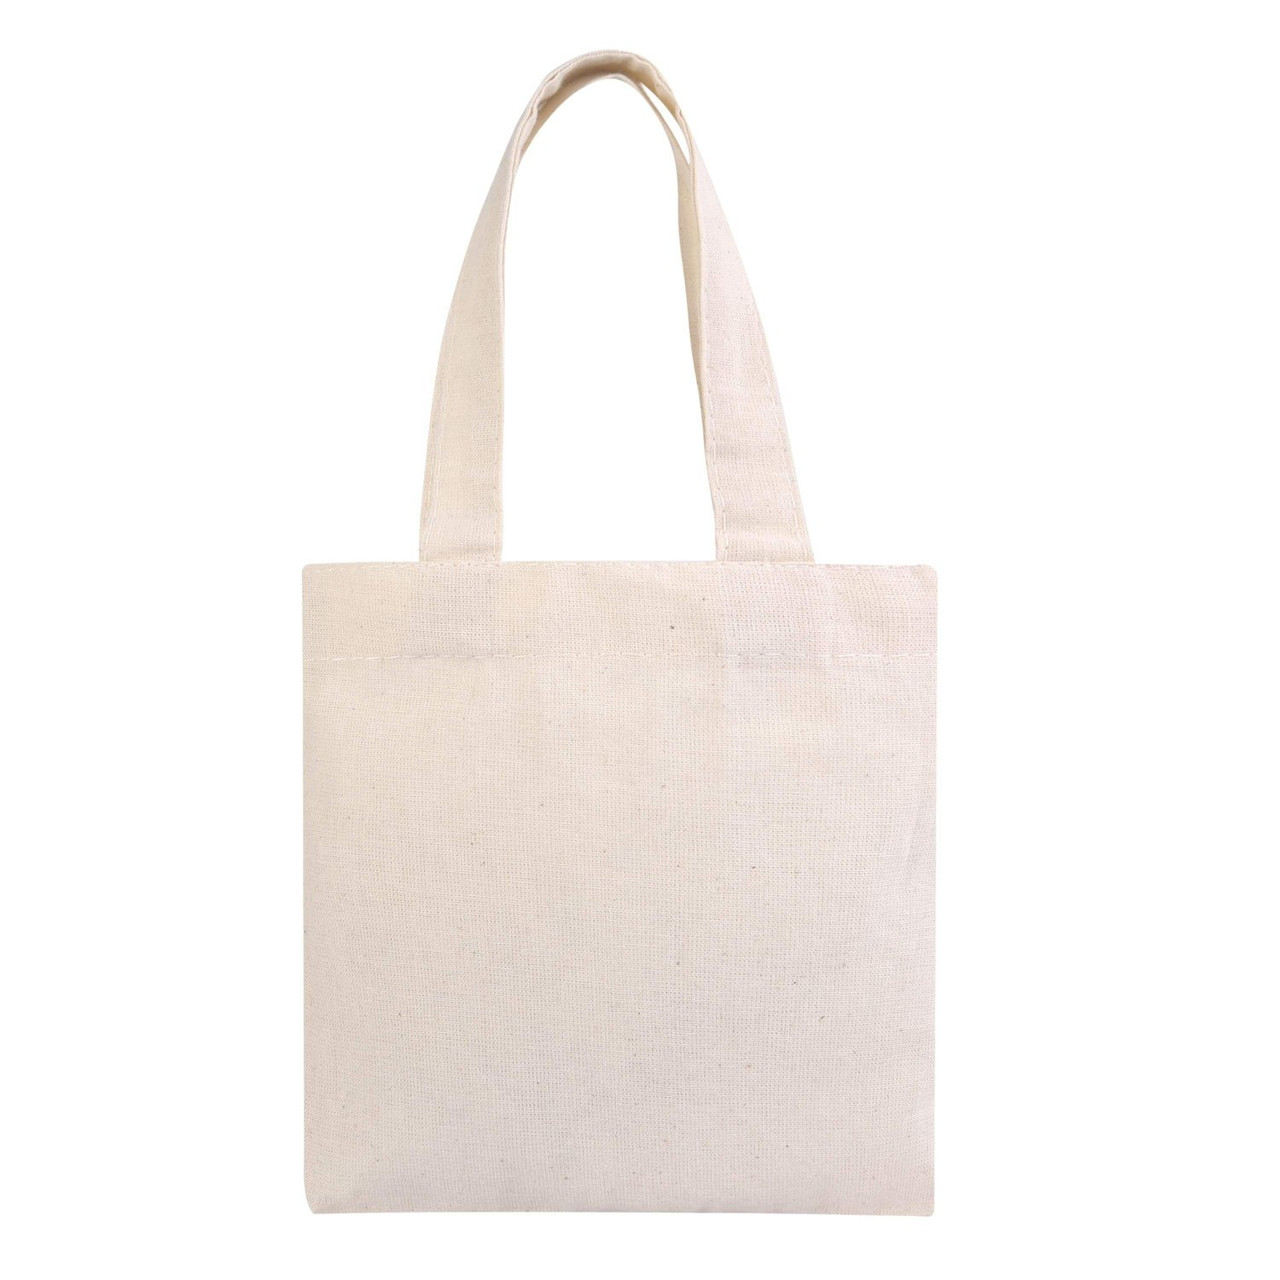 Wholesale Unlimited X Eden in Love Tote Bag | Wholesale Unlimited Inc.